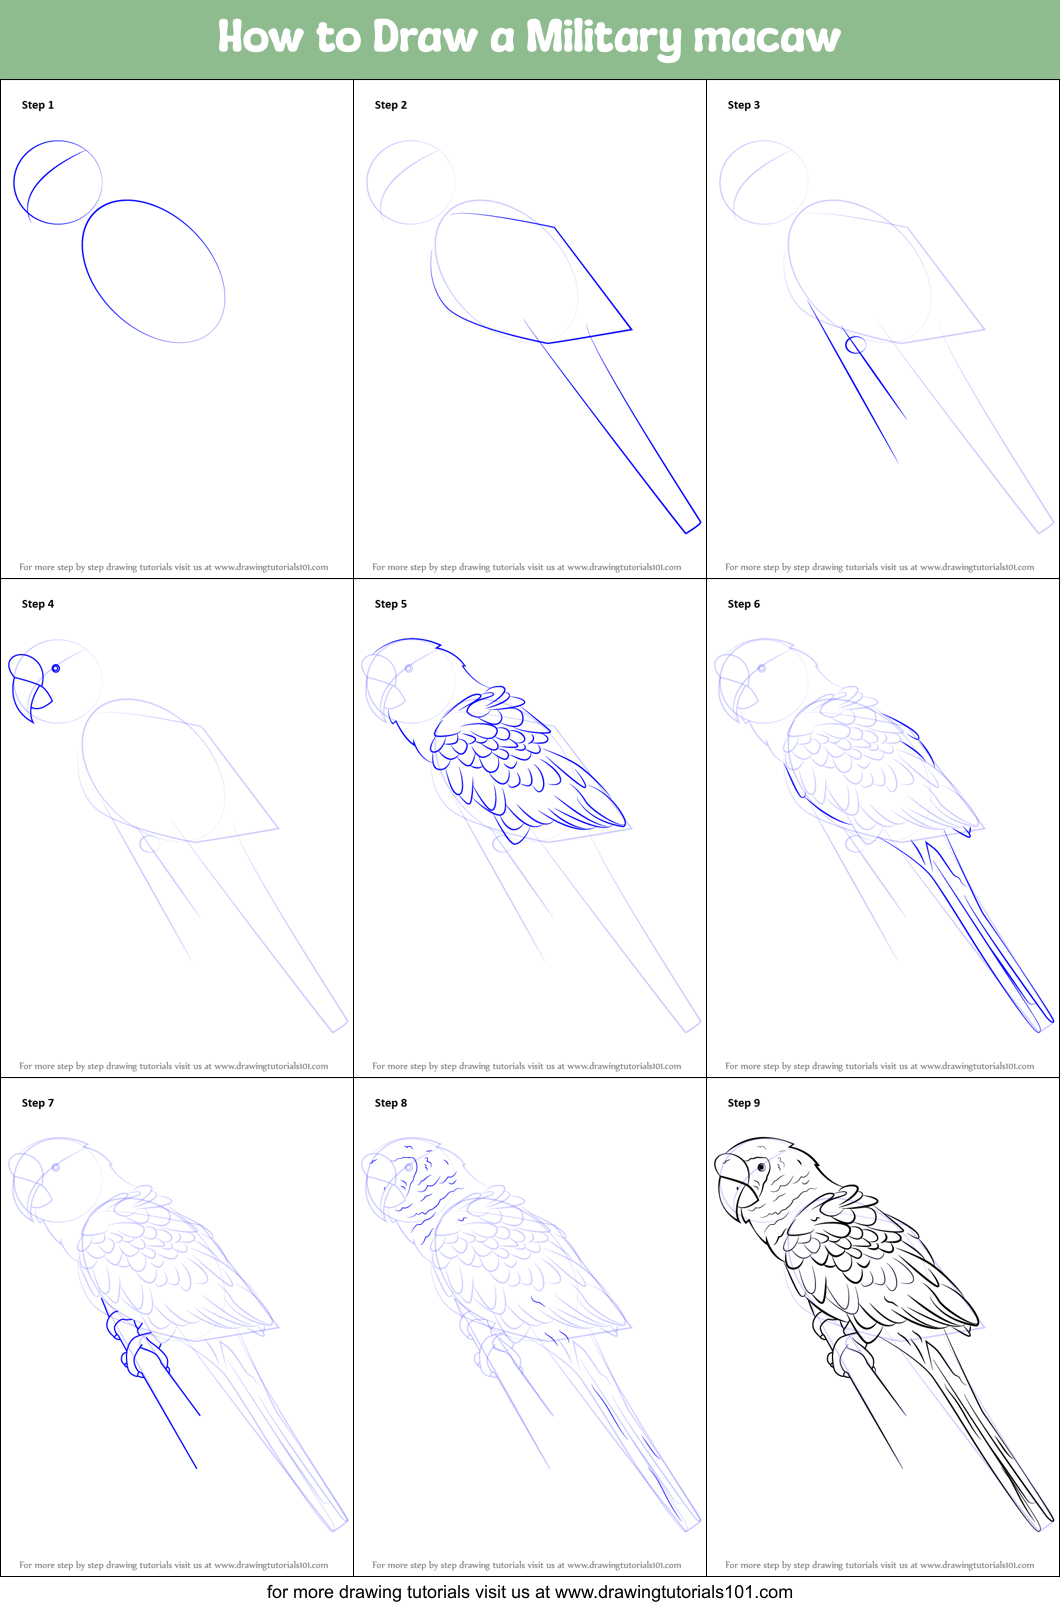 How to Draw a Military macaw printable step by step drawing sheet